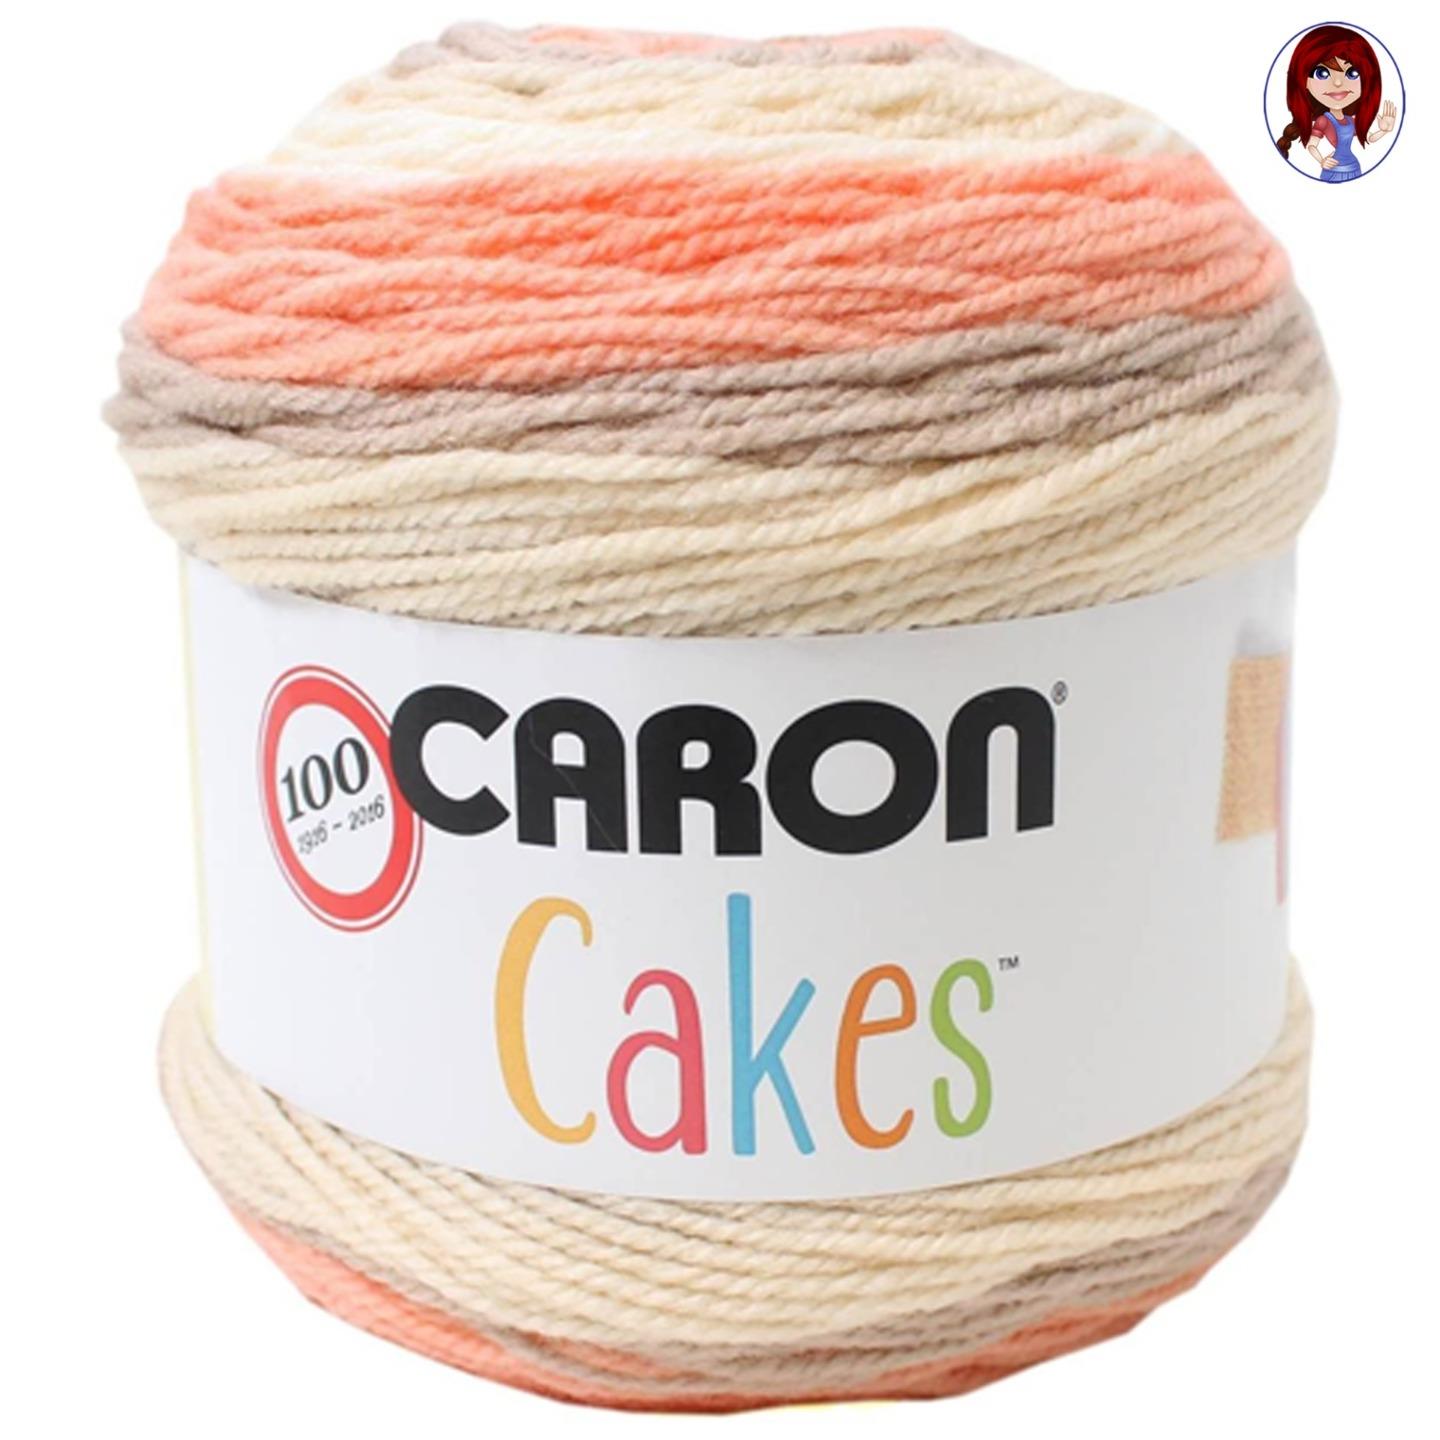 Caron Cloud Cakes Discontinued New and Unused You Choose the Color Price is  per Skein -  Israel